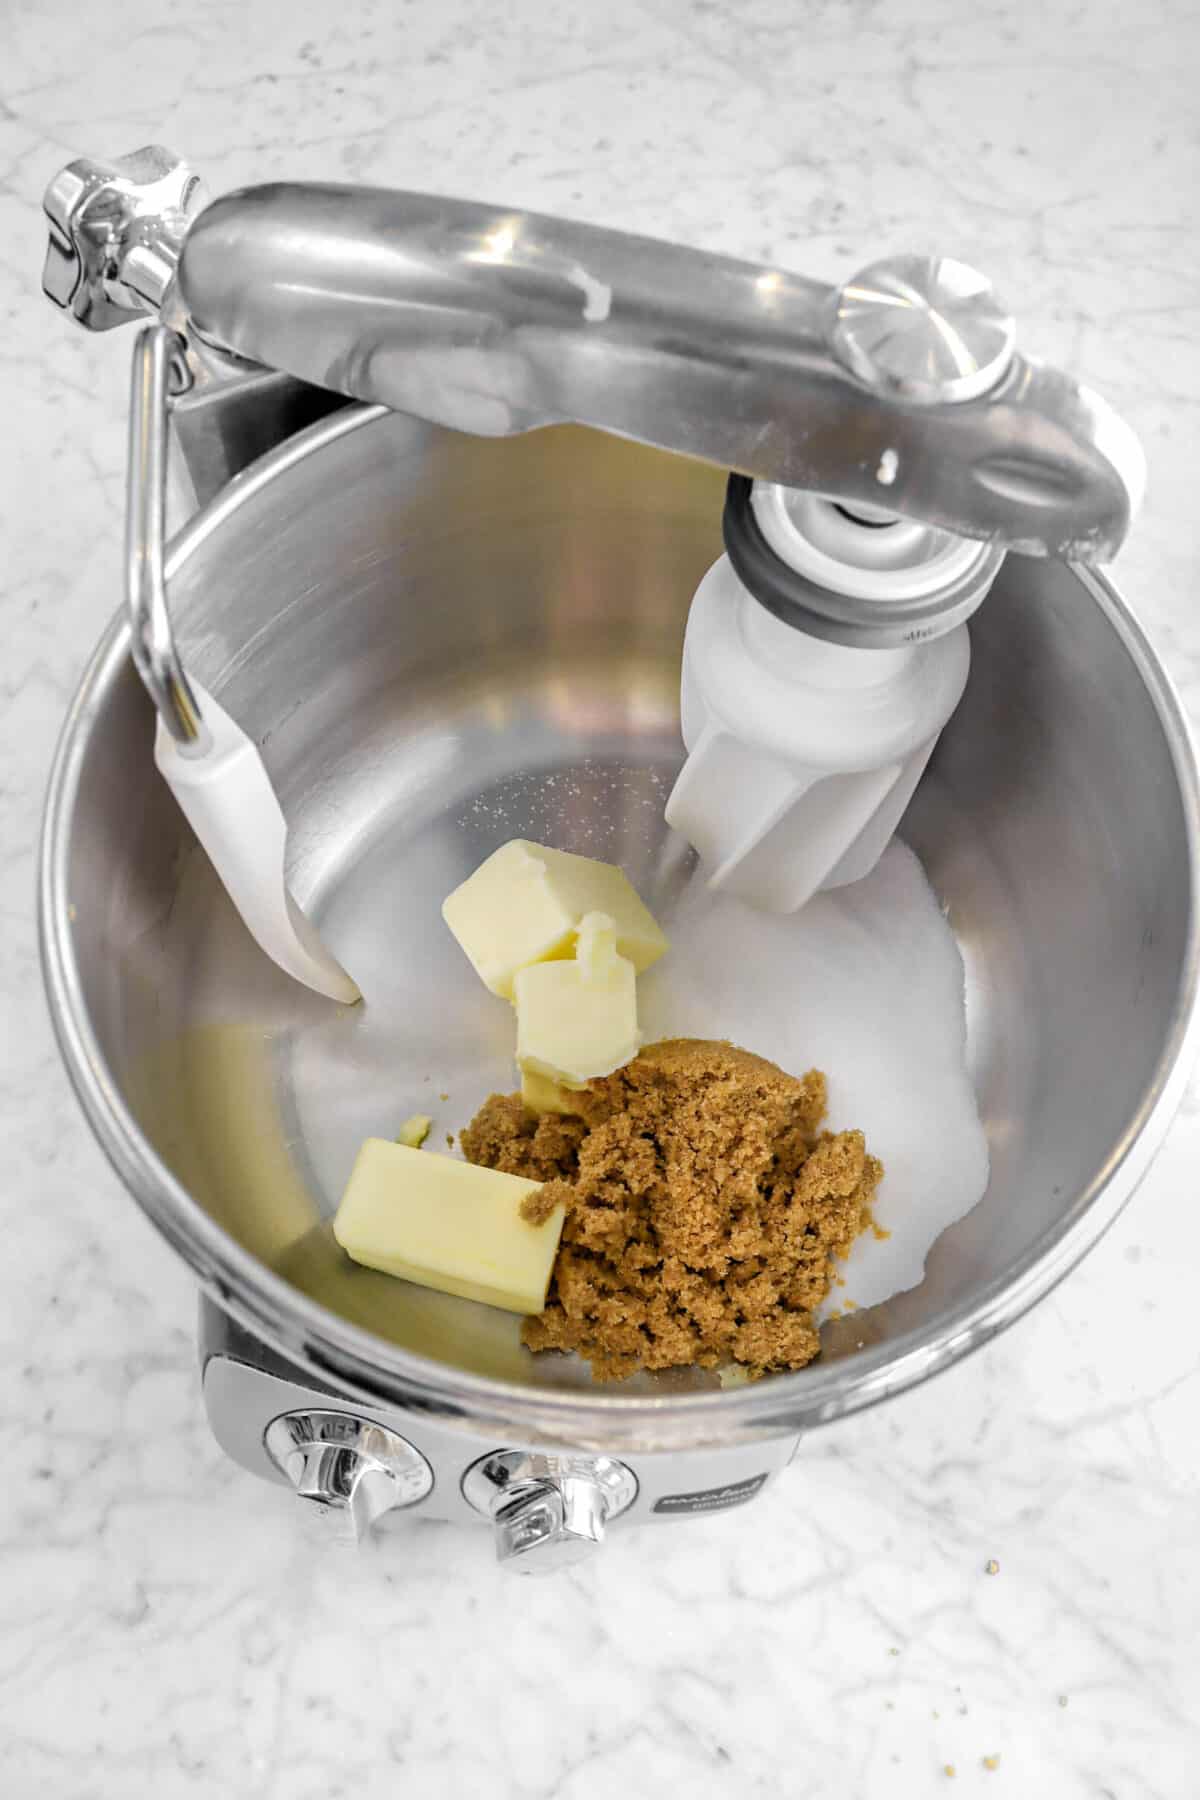 brown sugar, sugar, and butter in a mixer